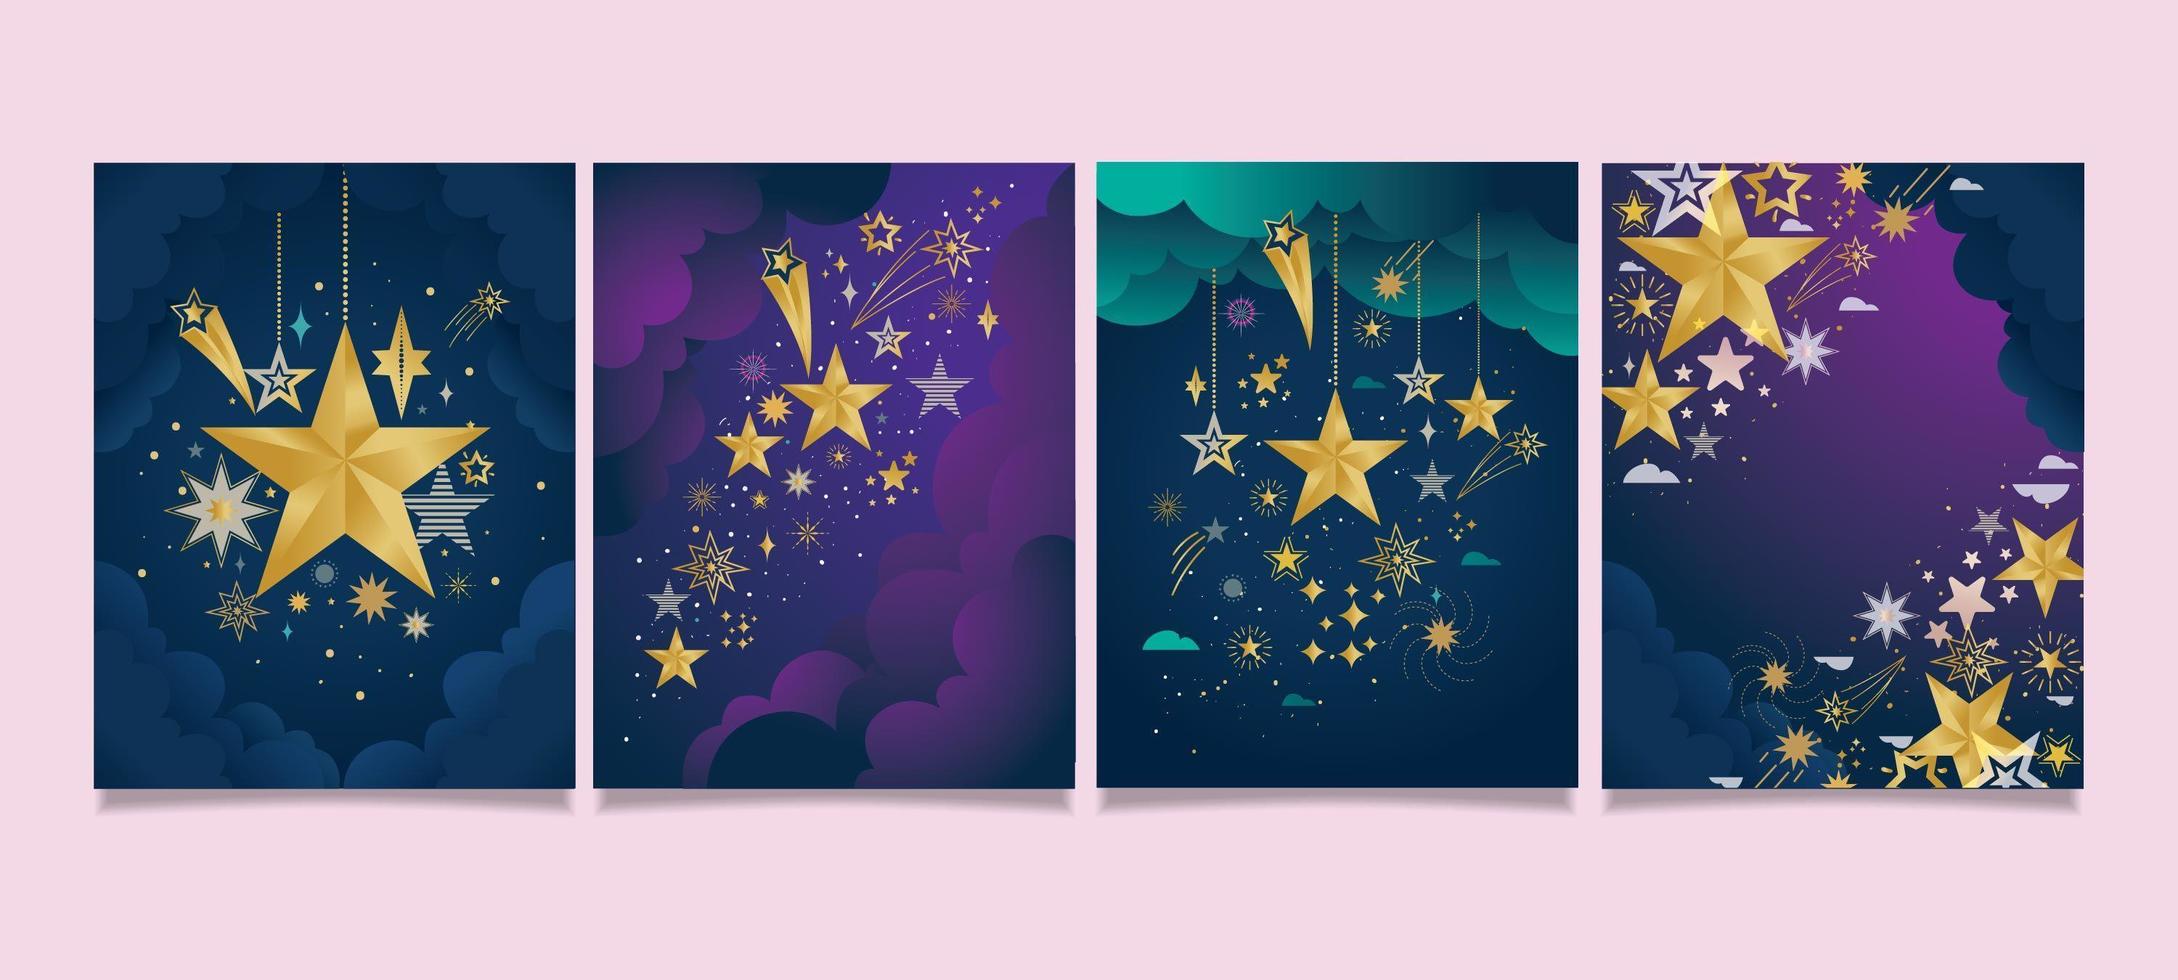 Sparkling Star Card with Purple and Indigo Shade vector